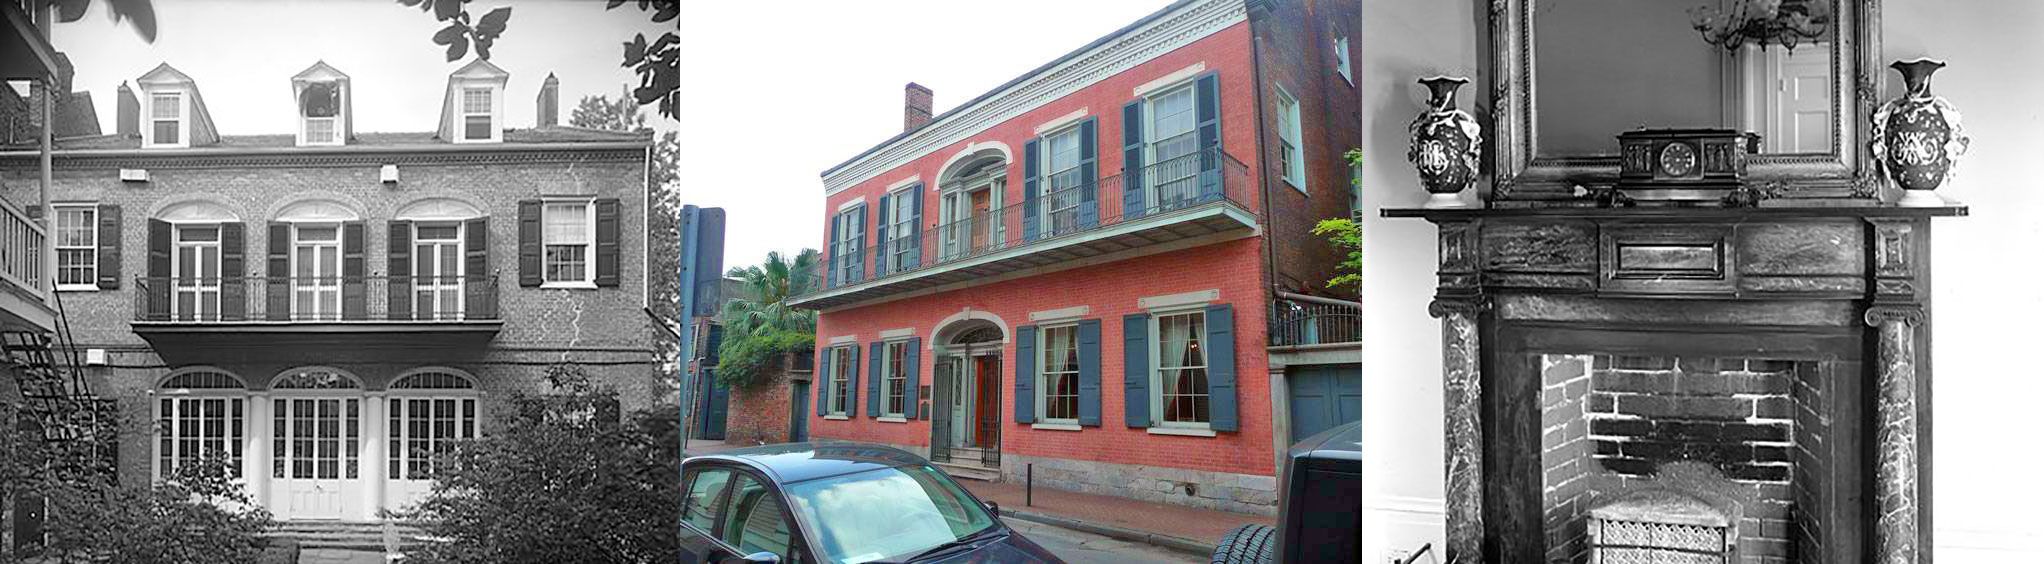 Hermann-Grima House in New Orleans